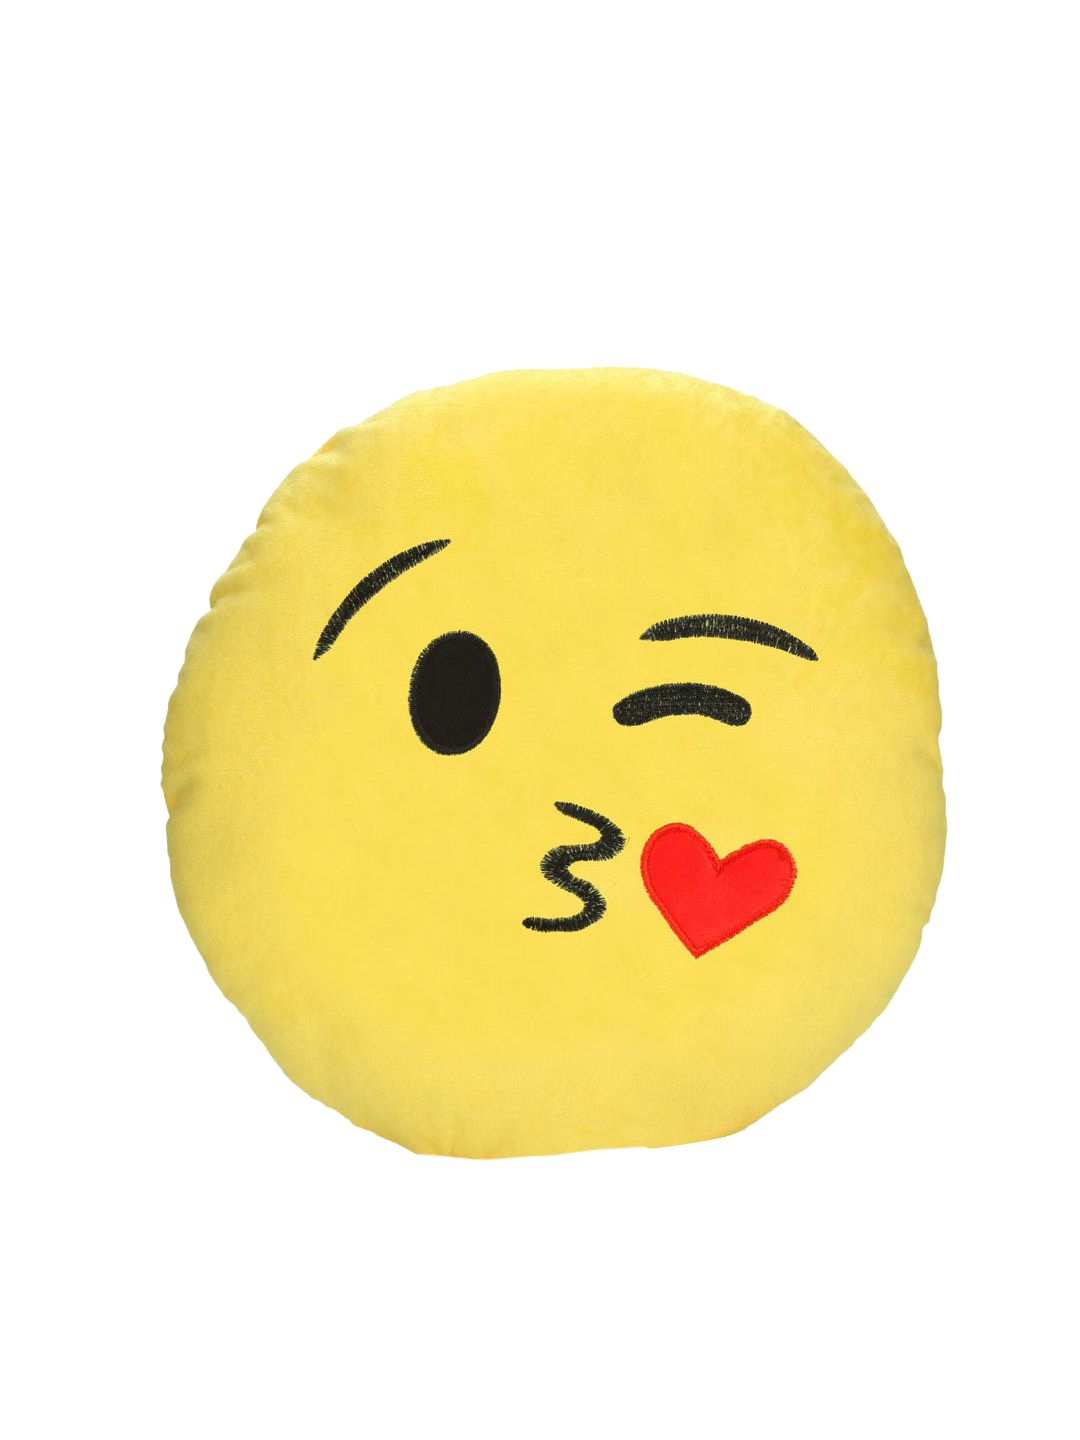 Athome by Nilkamal Unisex Yellow Smiley Round Cushions Price in India